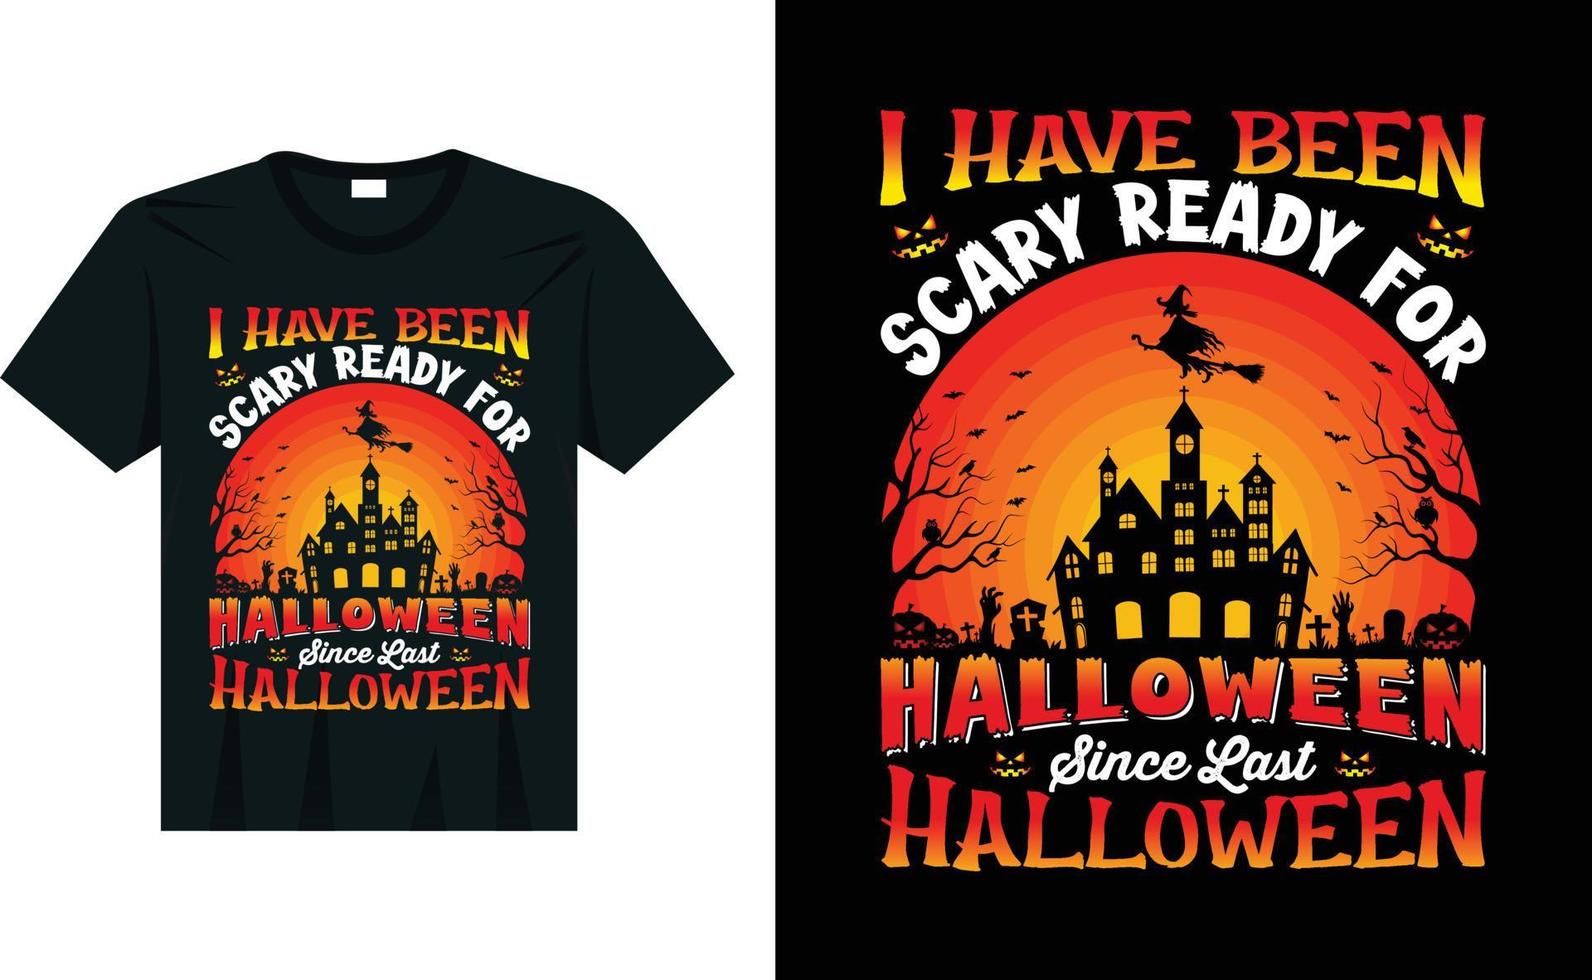 I have been scary ready for halloween since last halloween vintage background beautiful and eye catching halloween t shirt design vector